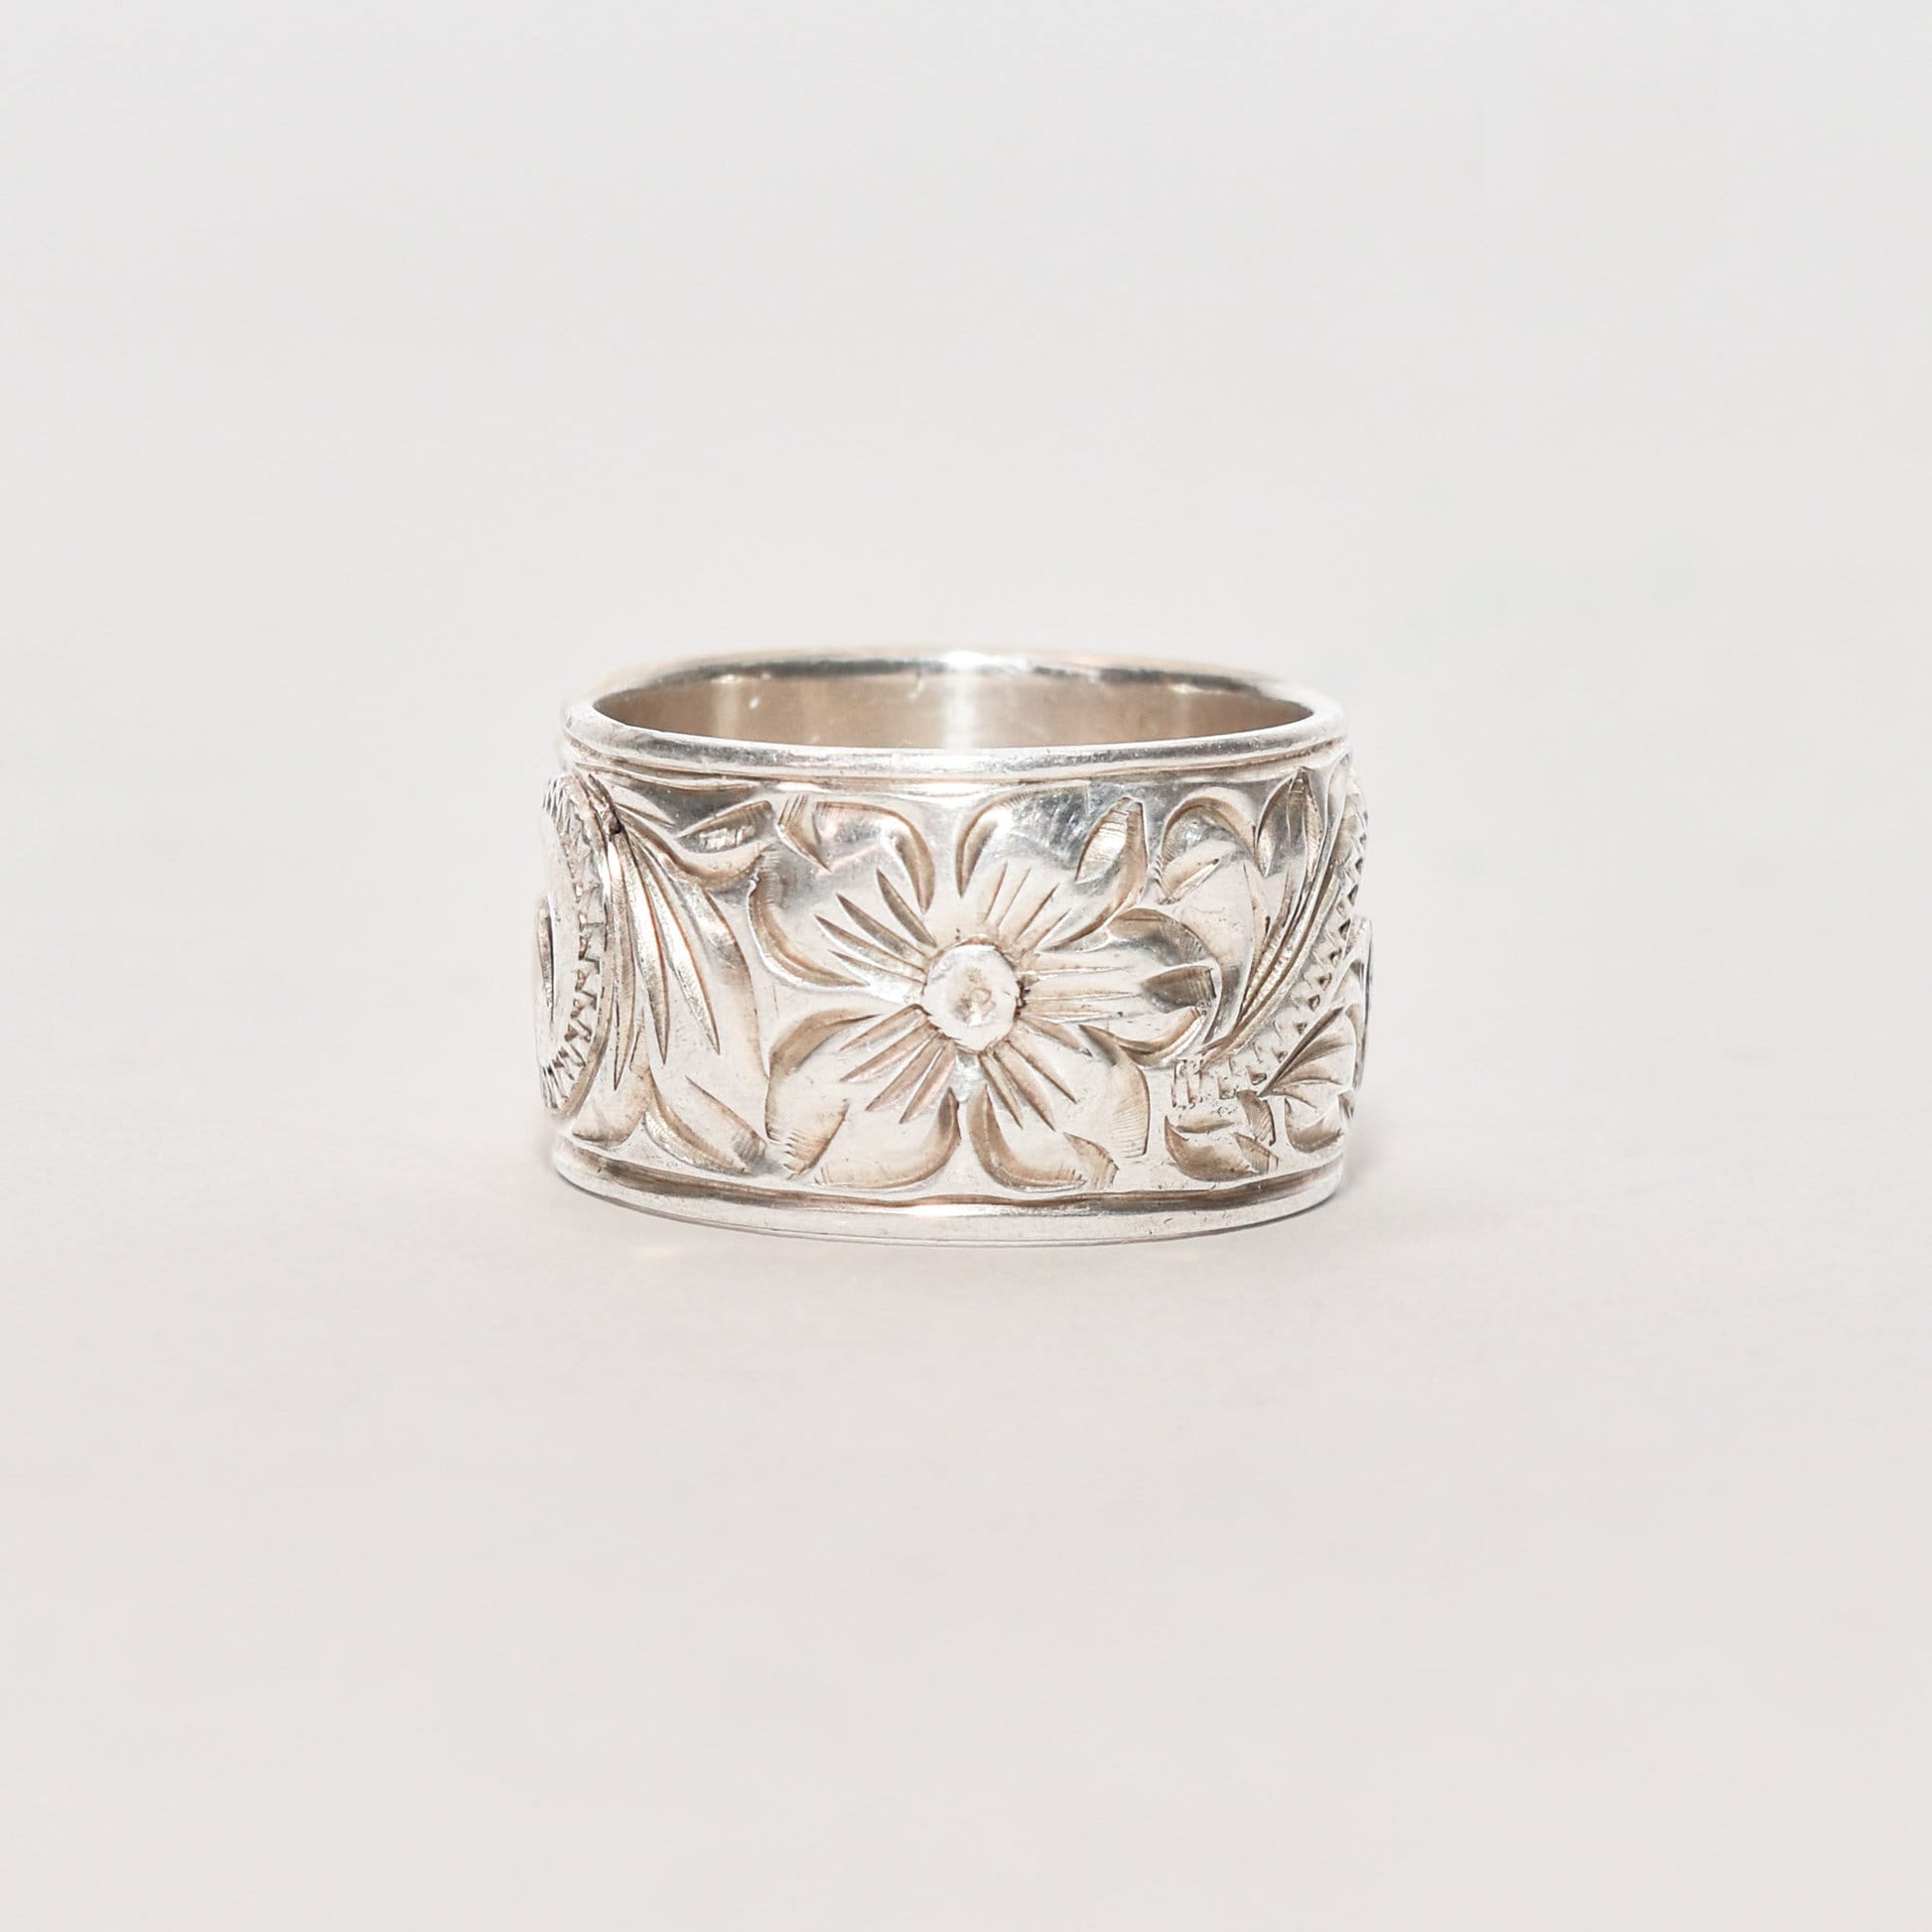 Floral-engraved sterling silver band ring, 11.5mm wide with Art Nouveau revival style design, size 6 US, displayed against a neutral background.